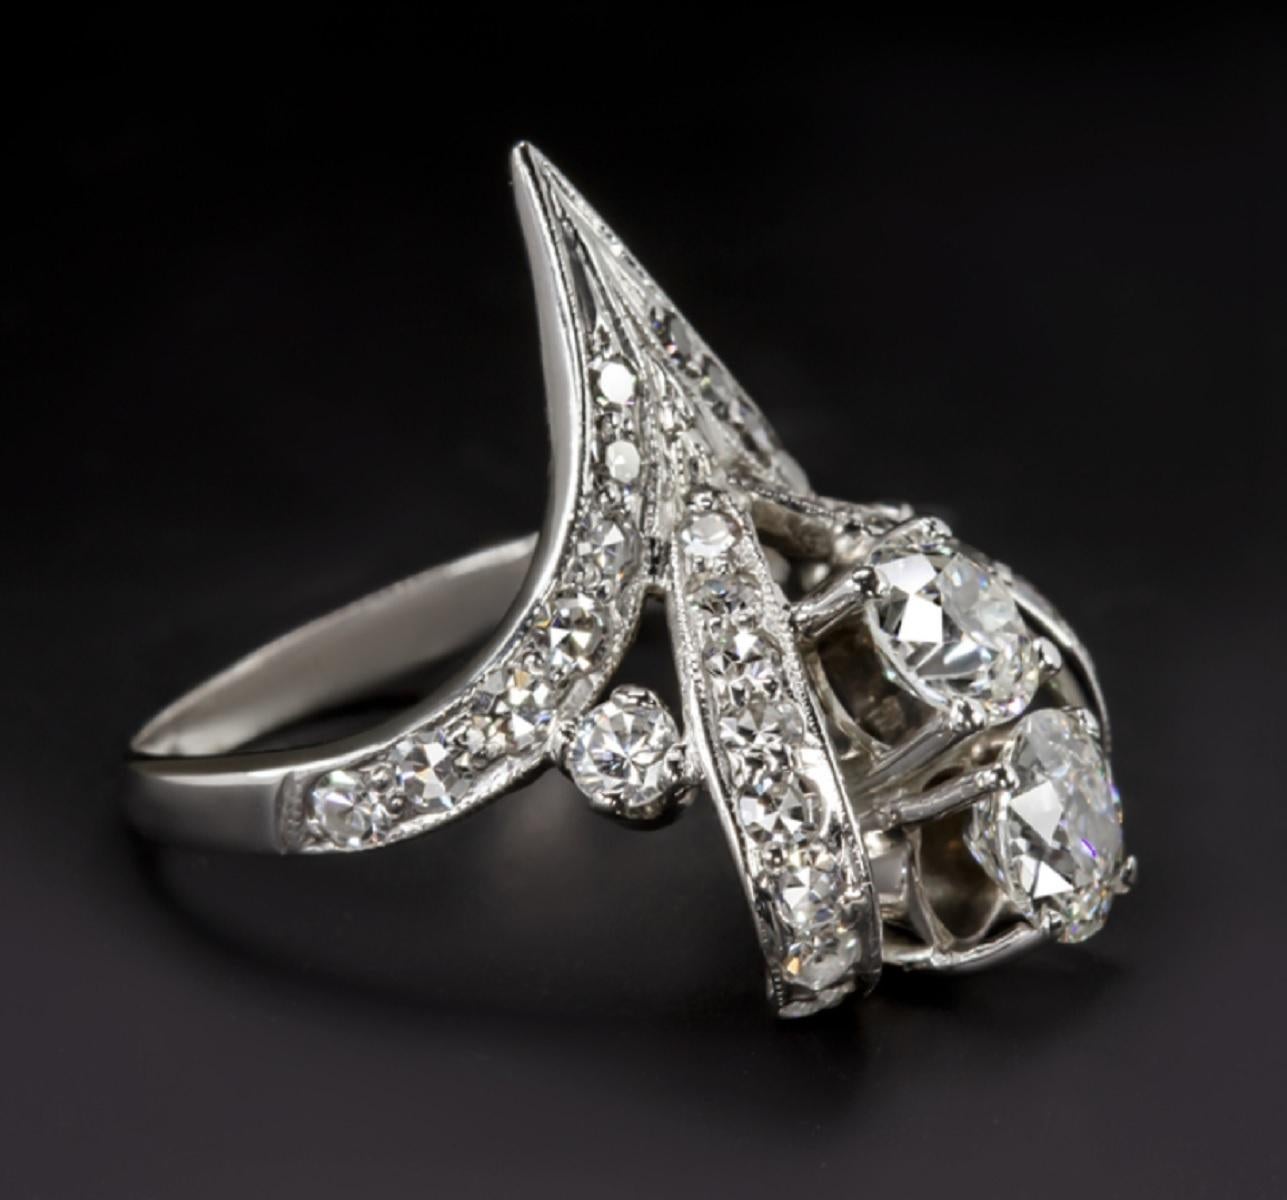 This gorgeous and very high quality vintage diamond cocktail ring has an absolutely one of a kind design featuring two dazzling old European cut diamonds set between curling, diamond encrusted ribbons. The two center diamonds are quite substantial